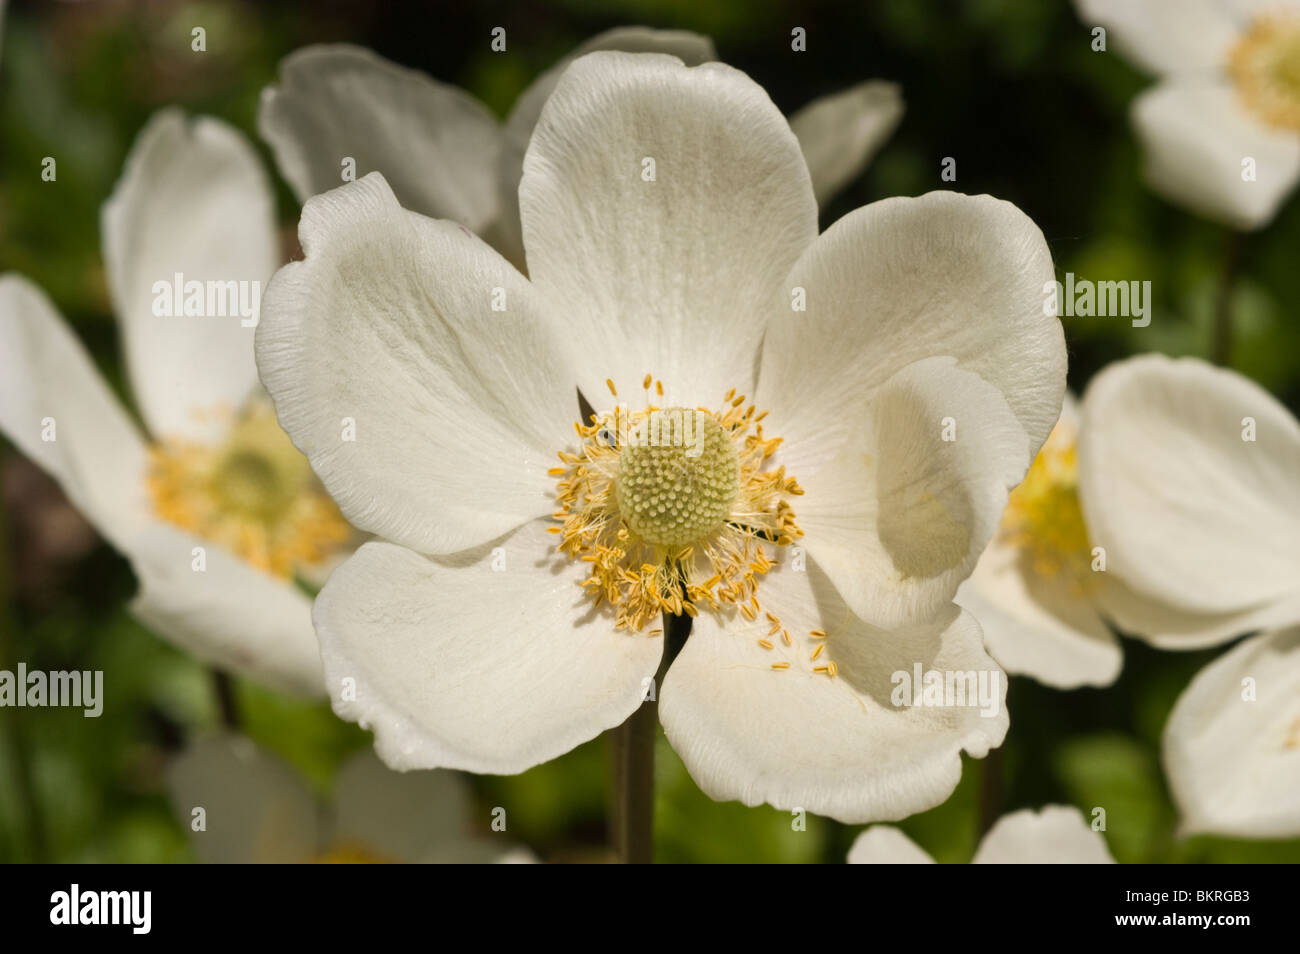 Anemone sylvestris, Yellow white flowers, Common wood anemone, Woodland drifts, wildflowers , Ranunculaceae, spring, Stock Photo